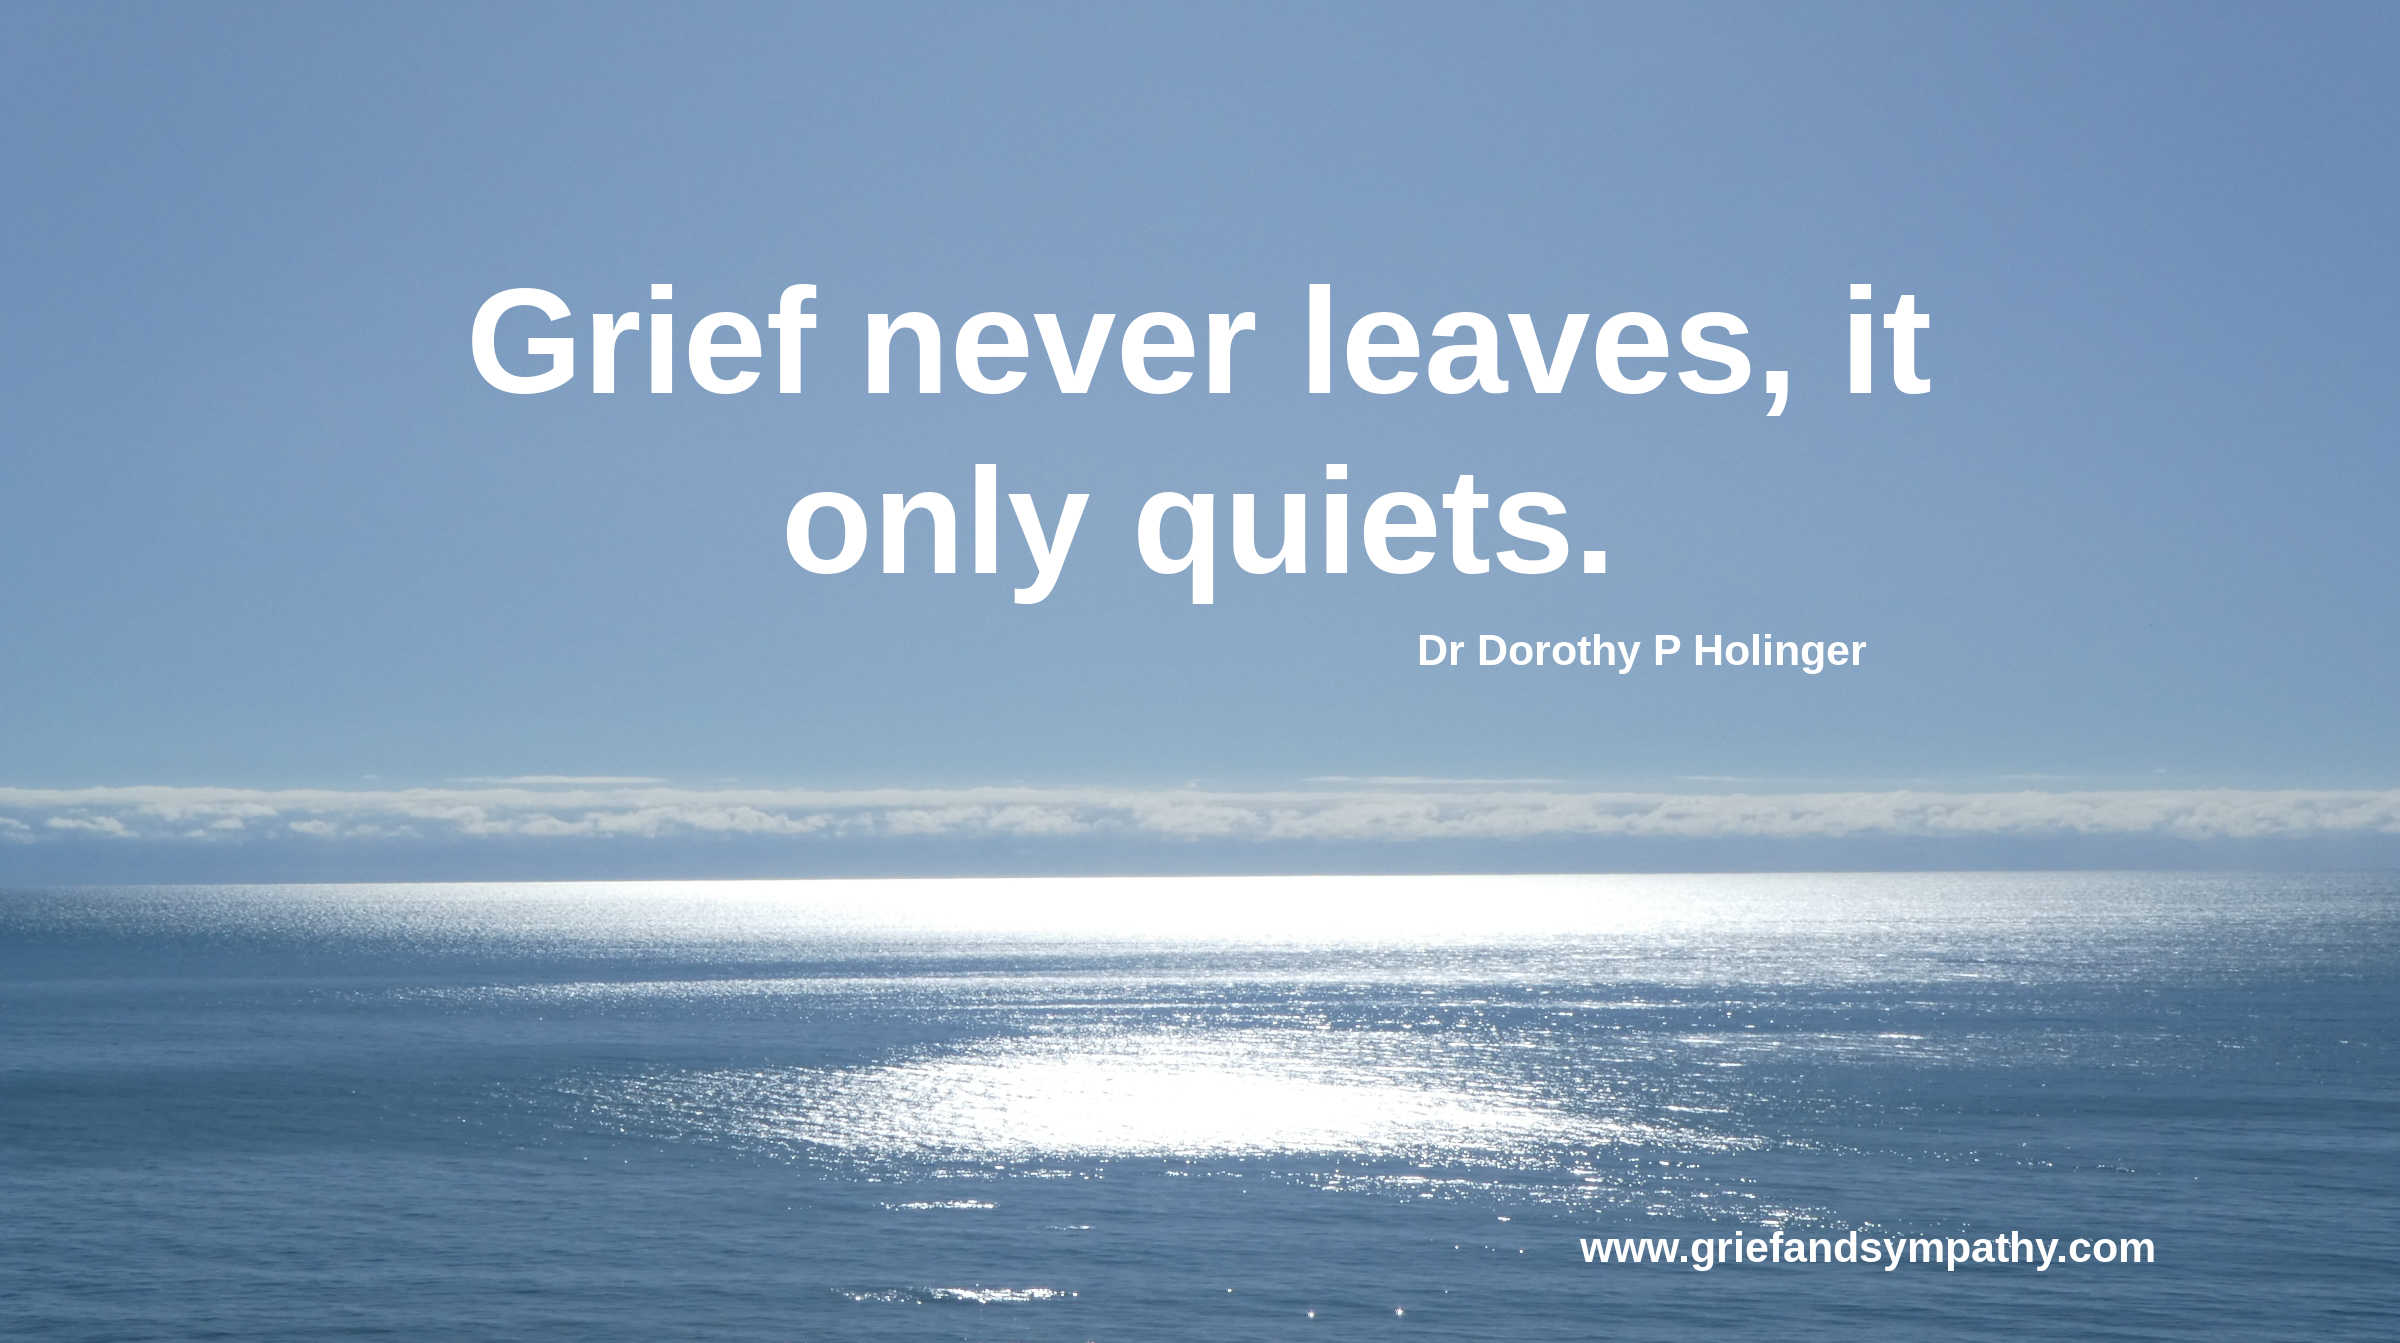 Grief never leaves, it only quiets - meme with shining light on the ocean.